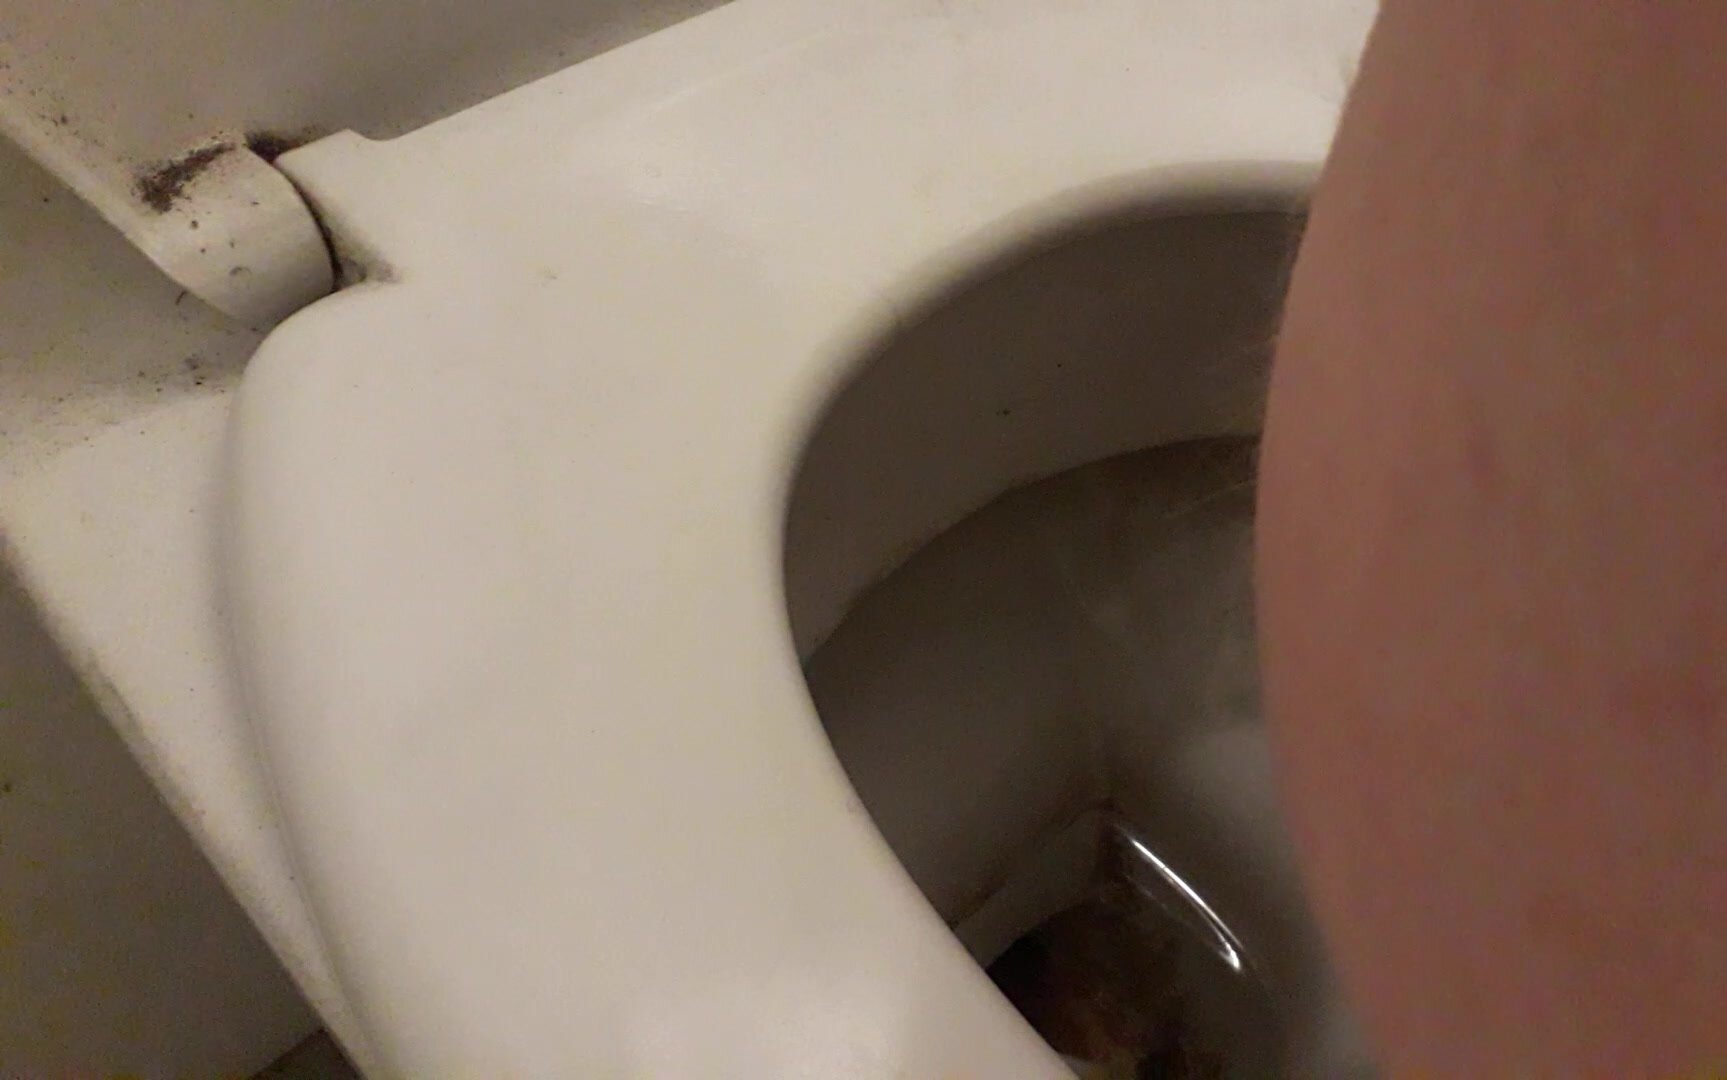 Taking a shit at work - video 8